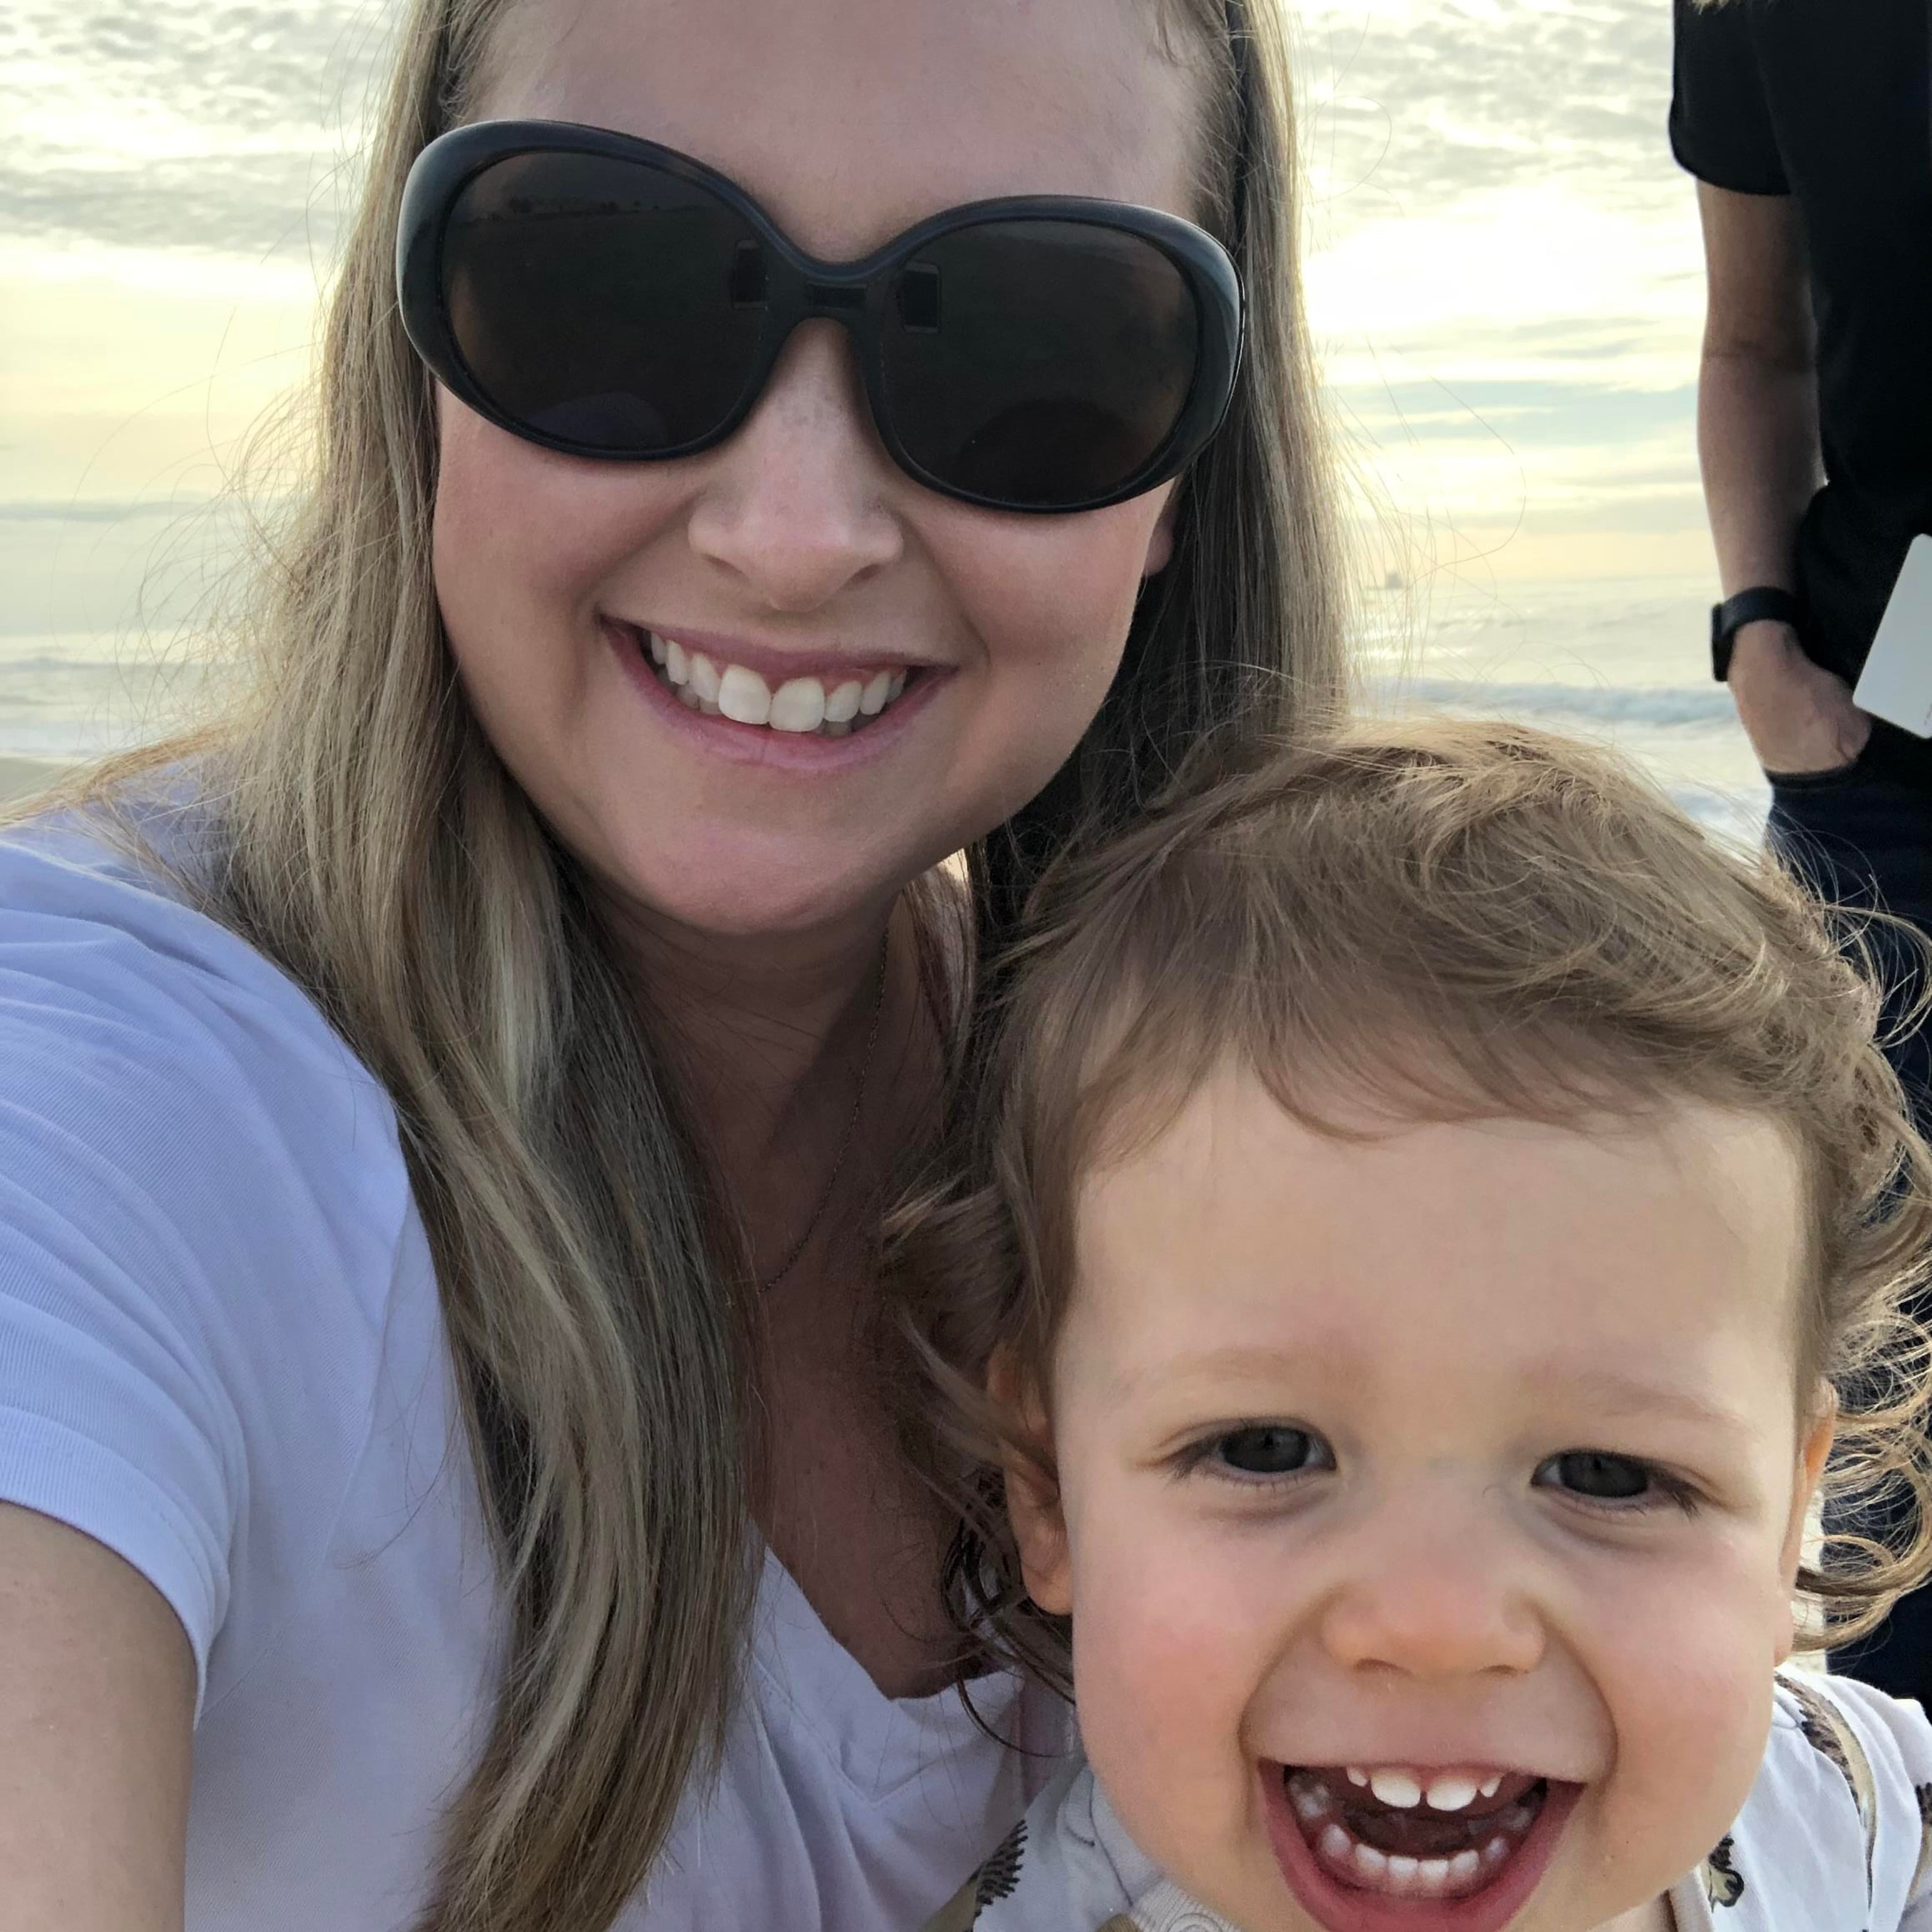 Full-time nanny care for an adorable 18 month old little boy! (Salary and start date are flexible)